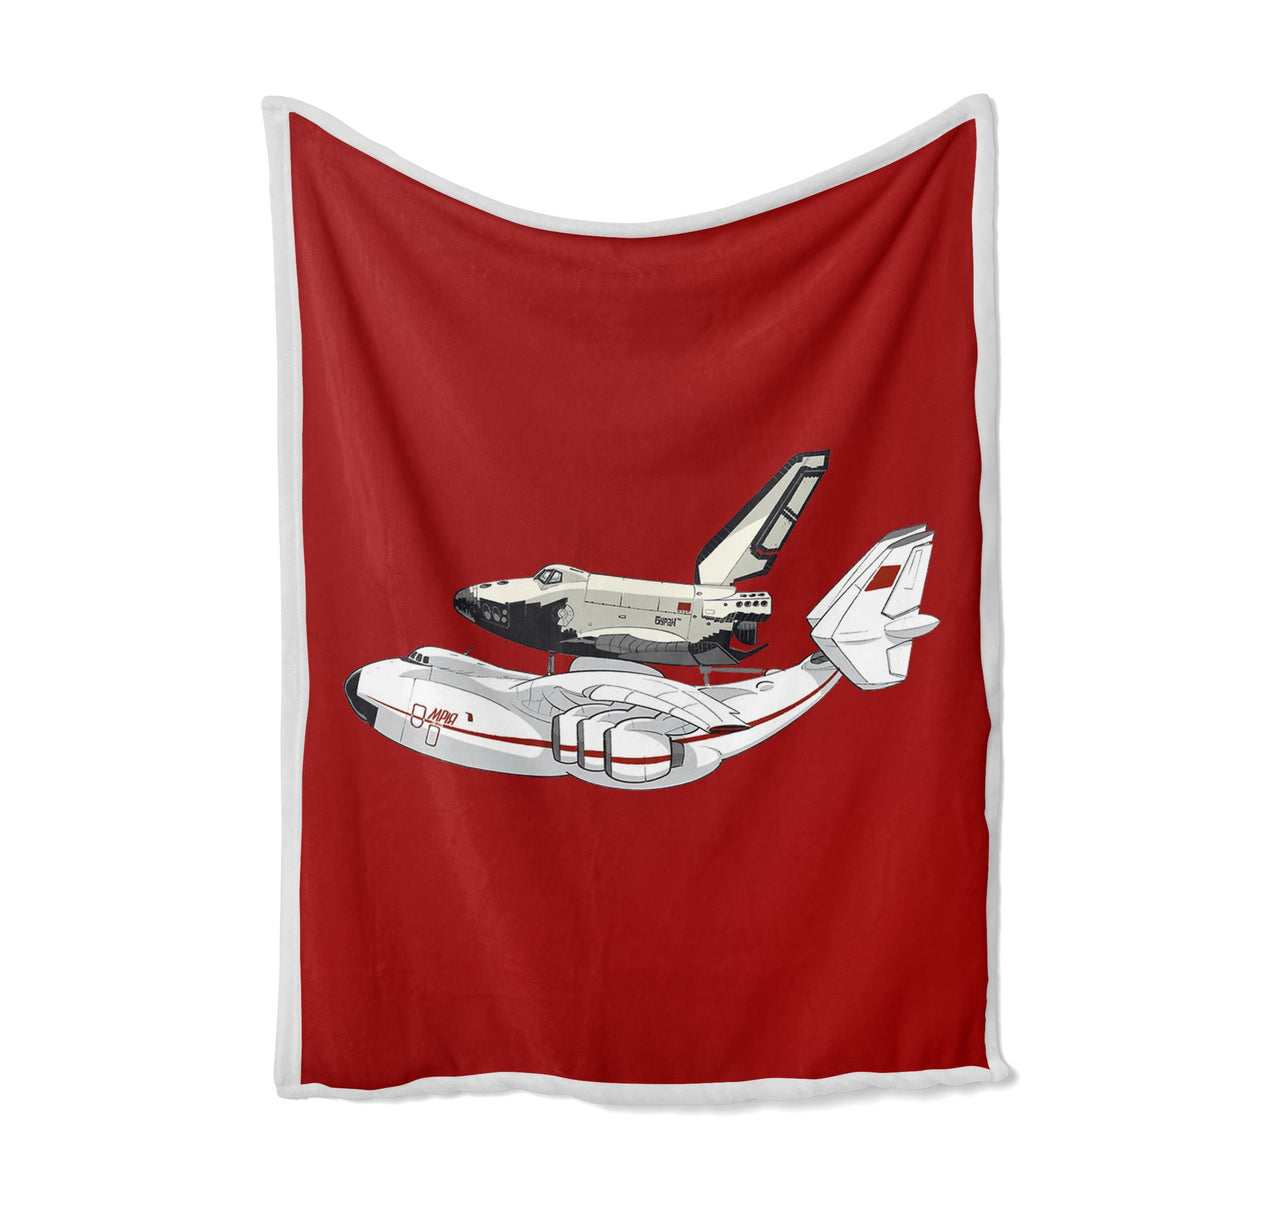 Buran & An-225 Designed Bed Blankets & Covers